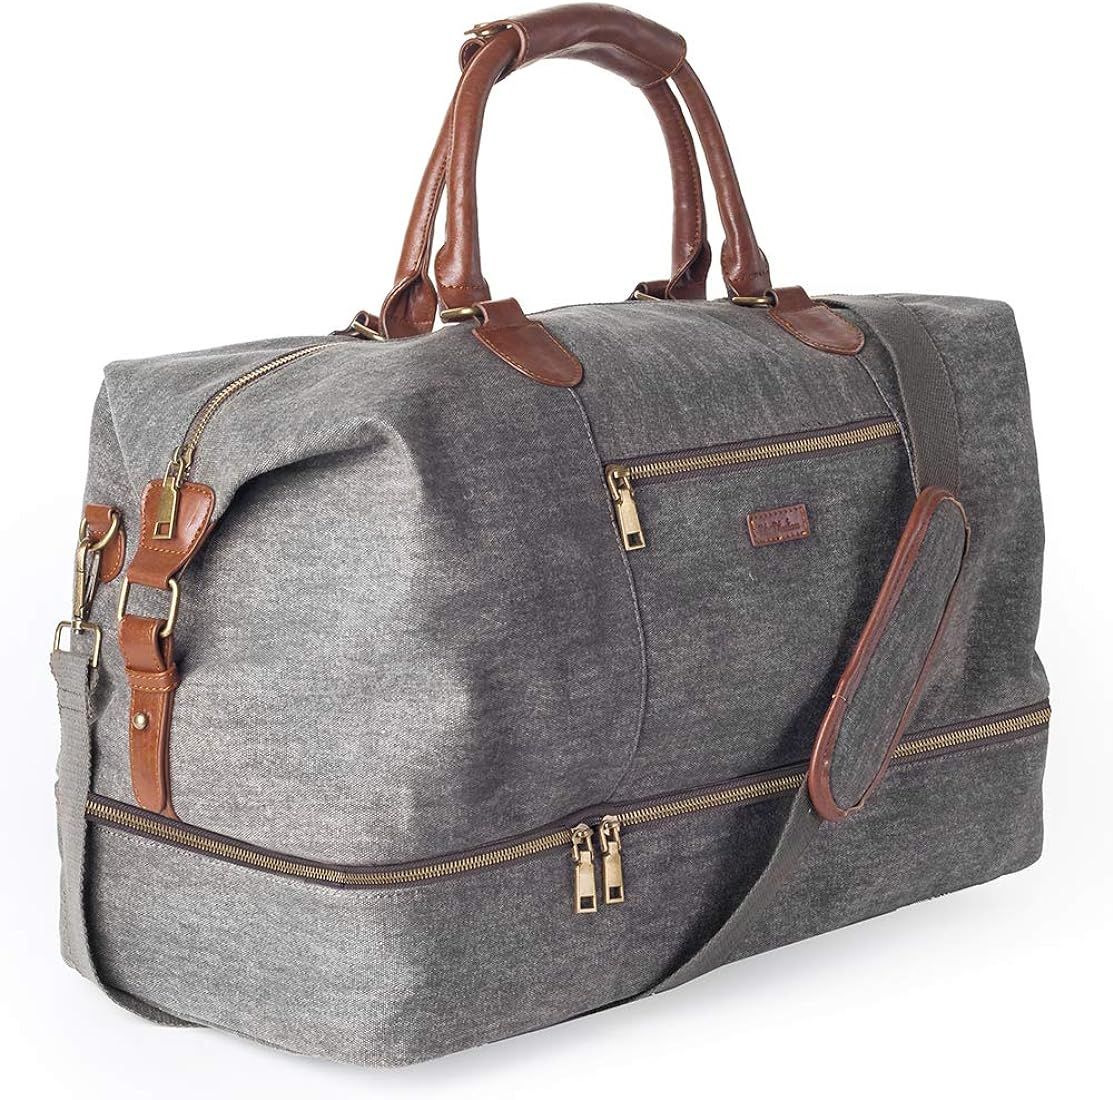 MyMealivos Canvas Weekender Bag, Overnight Travel Carry On Duffel Tote with Shoe Pouch (Grey) | Amazon (US)